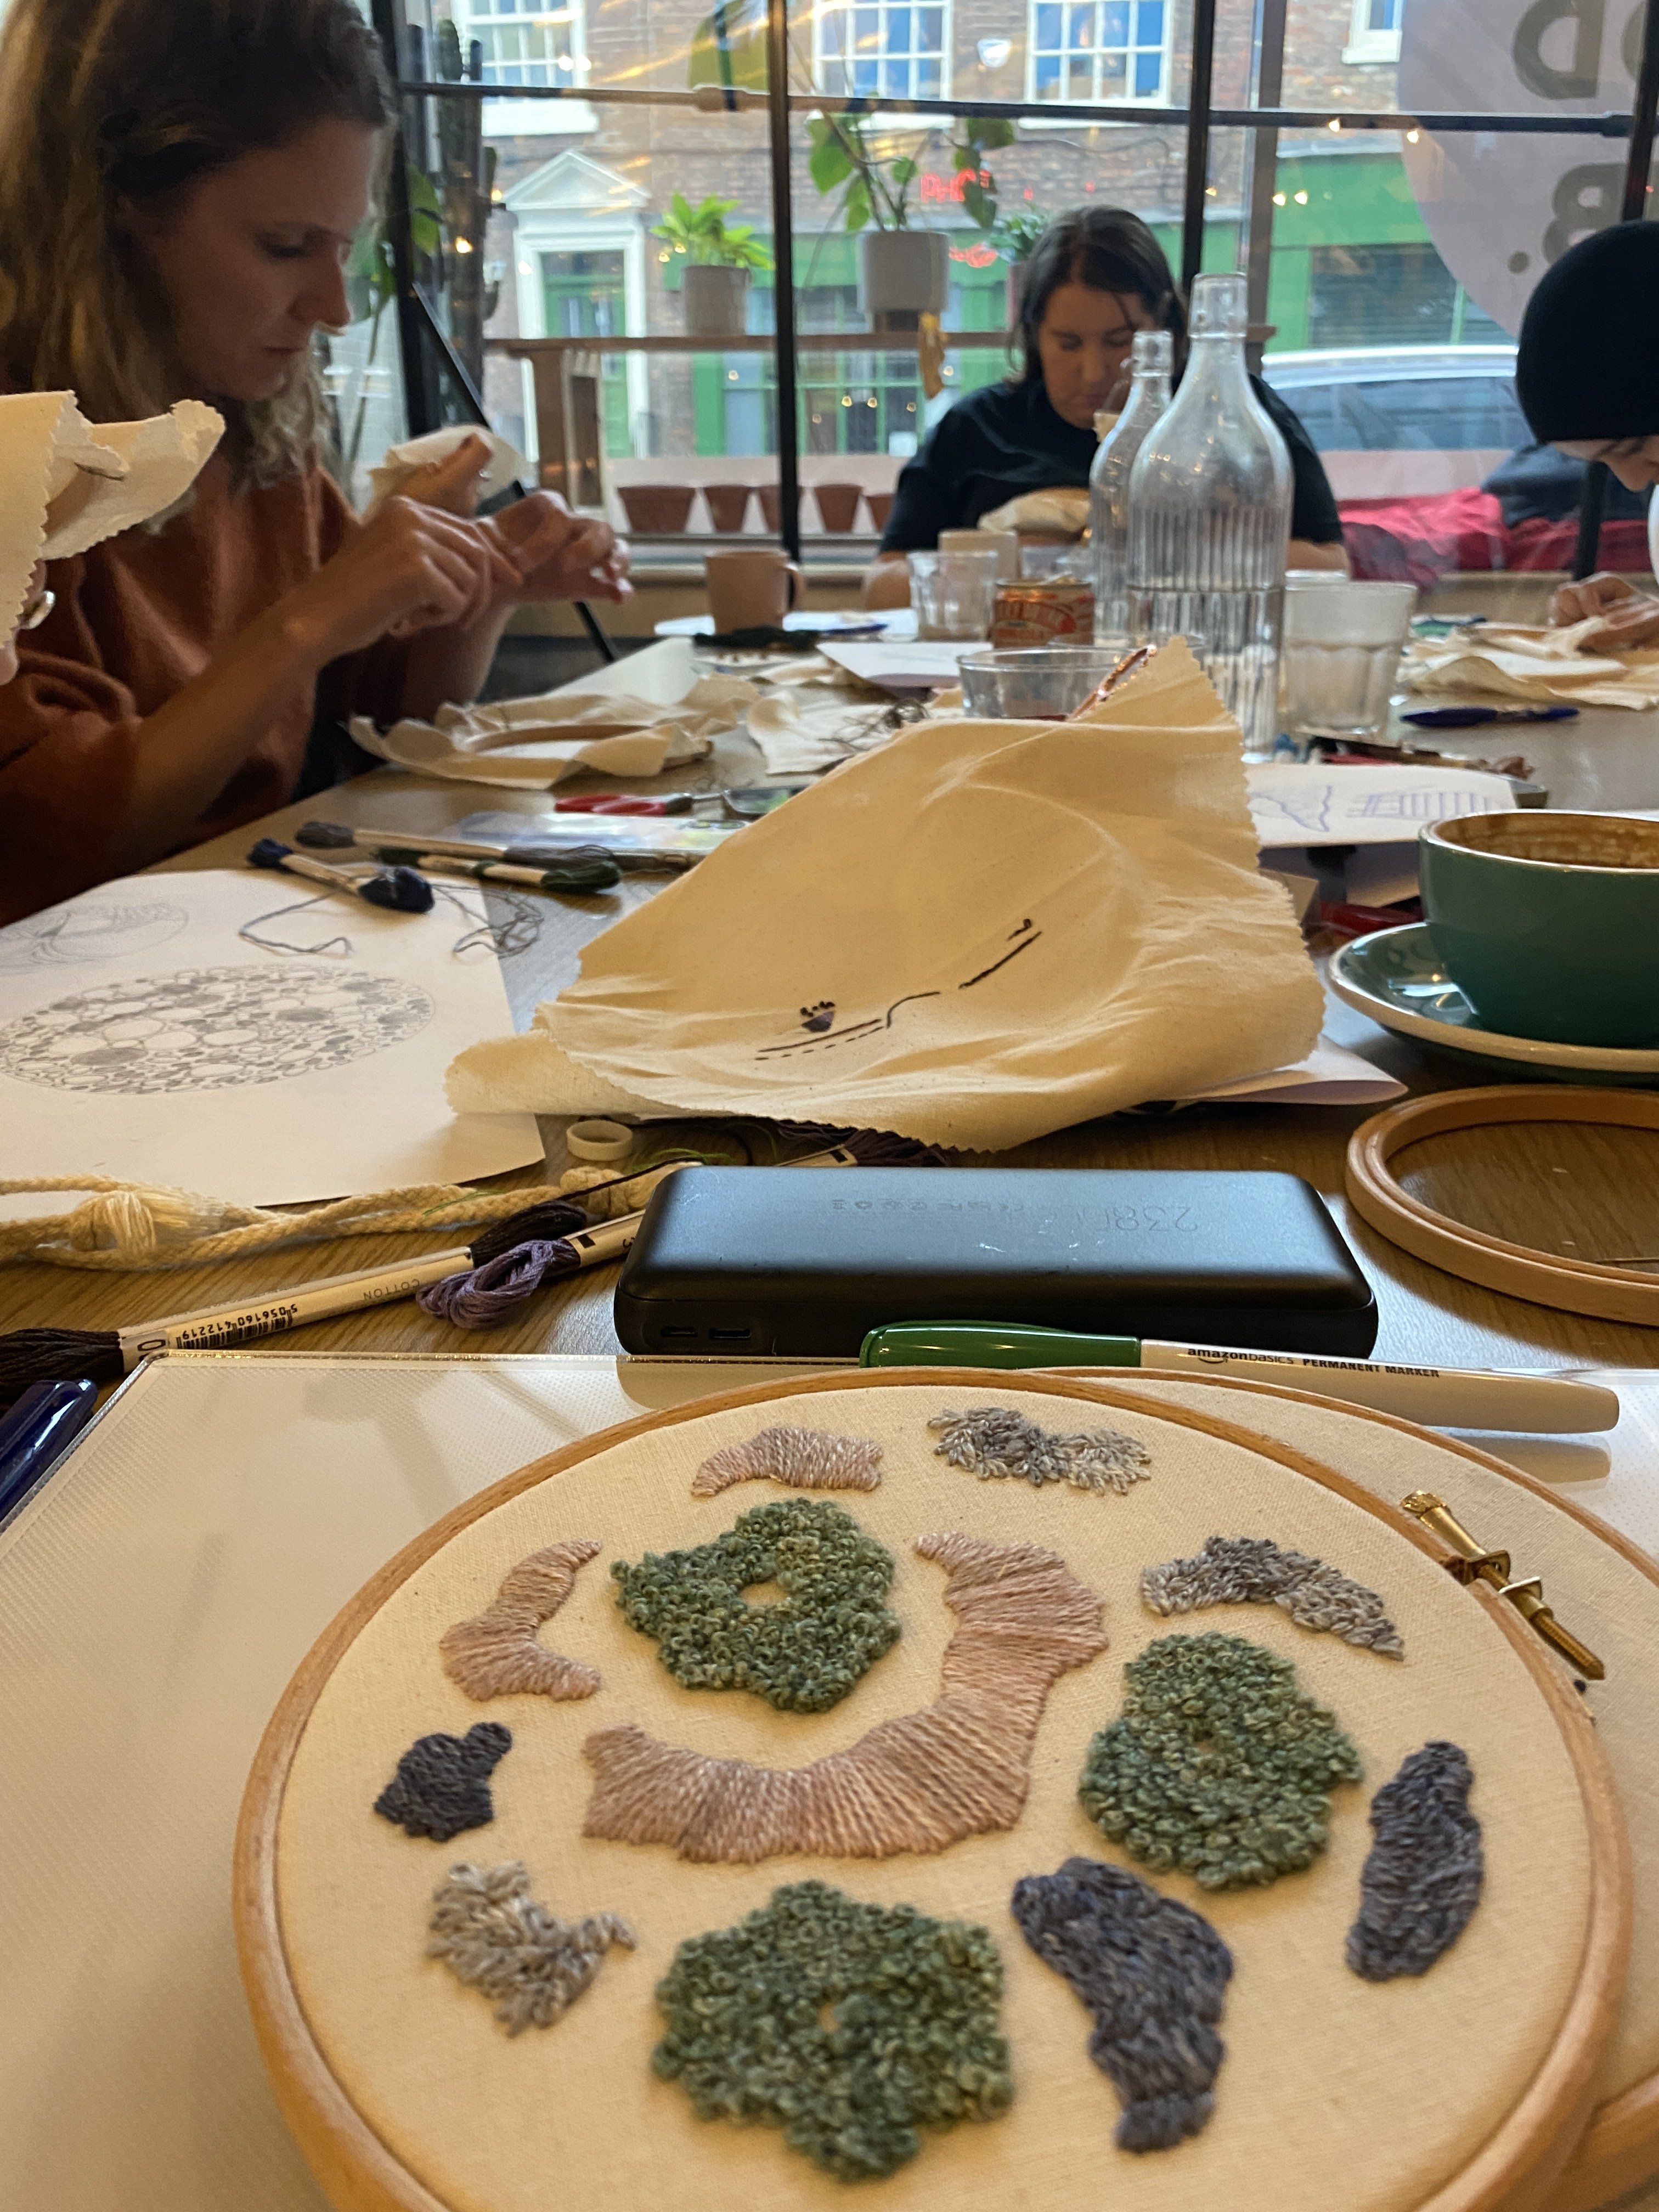 Mindful Embroidery Workshop - One Stitch at a time